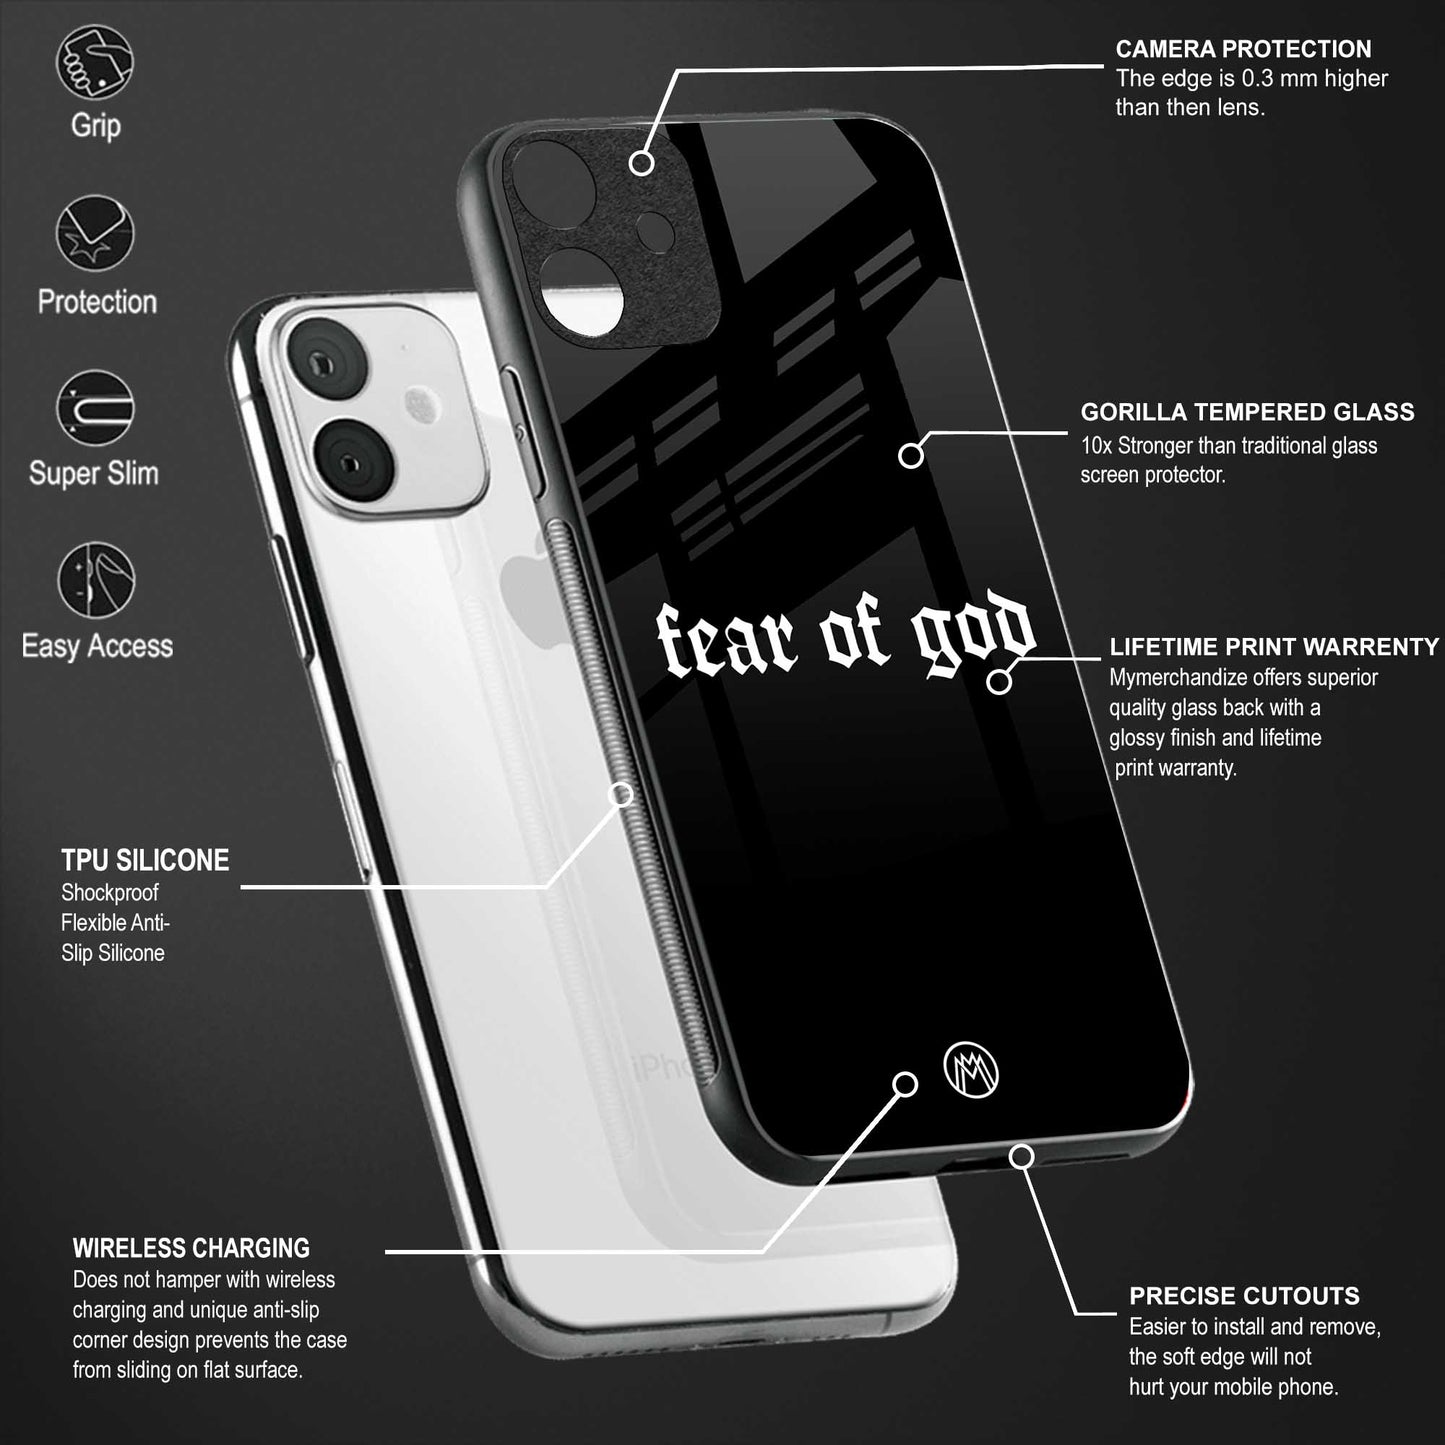 fear of god phone cover for redmi note 10